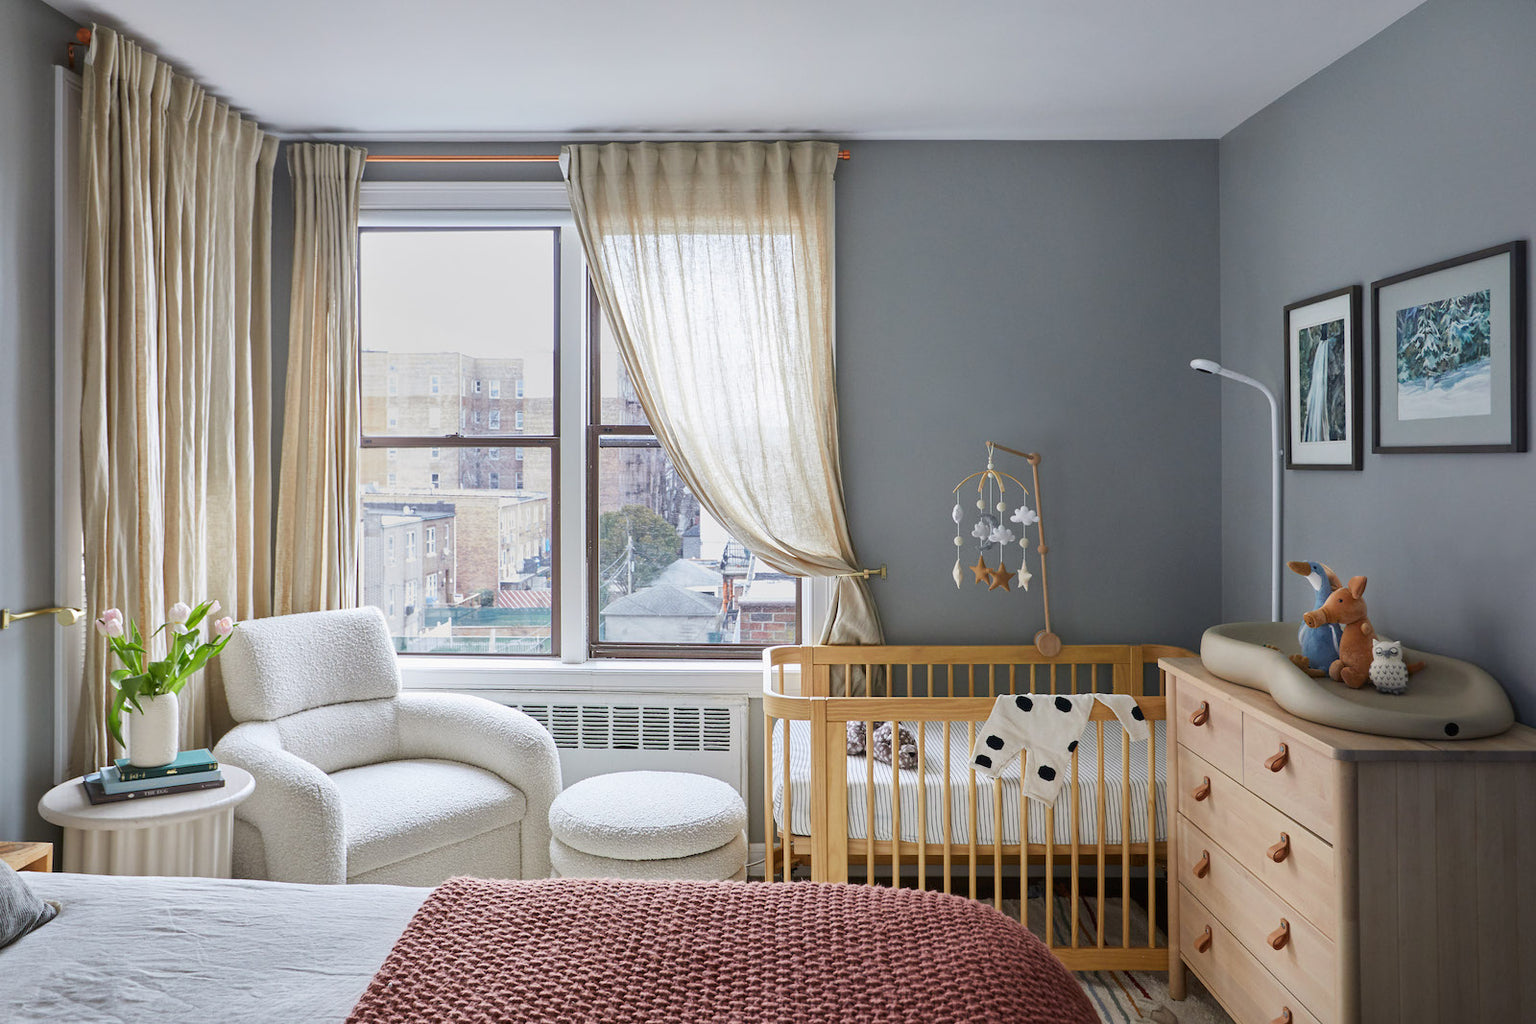 This Artist’s Mini Nursery Is The Most Stylish Way to Room Share